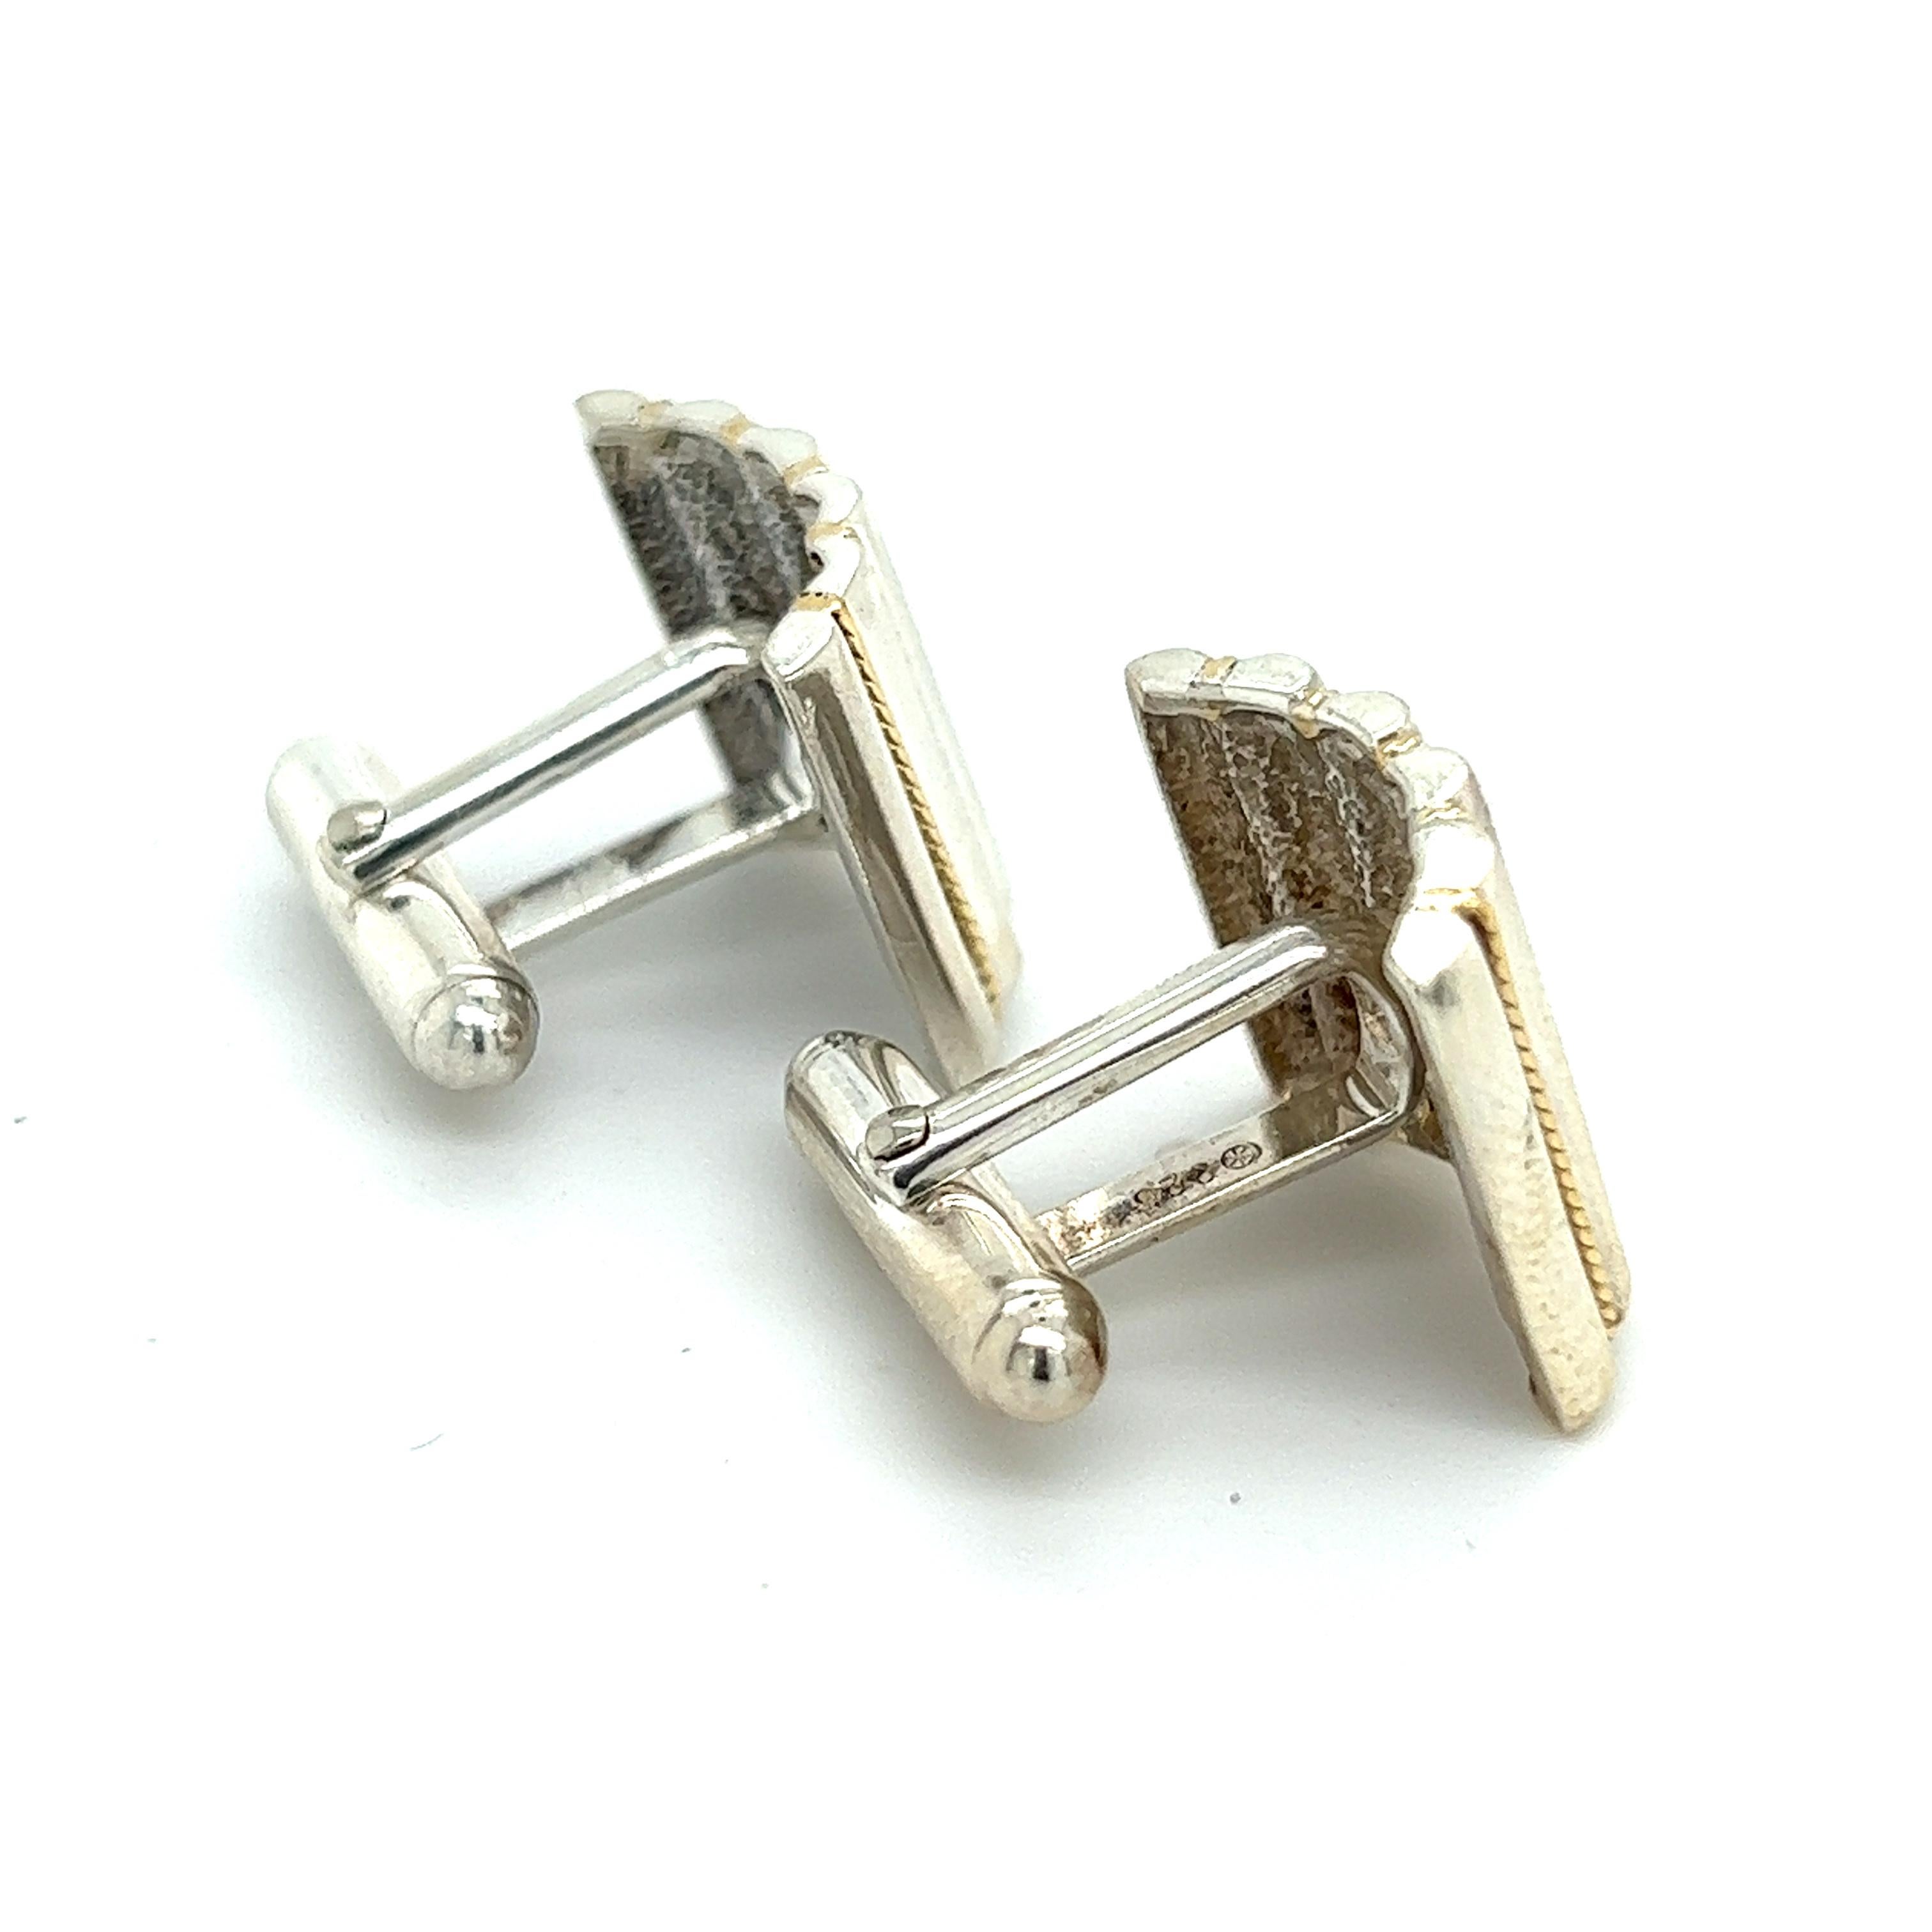 Tiffany & Co Estate Cufflinks 18k Gold + Sterling Silver TIF331

These elegant Authentic Tiffany & Co Men's Cufflinks are made of sterling silver and gold have a weight of 12.6 grams.

TRUSTED SELLER SINCE 2002

PLEASE SEE OUR HUNDREDS OF POSITIVE